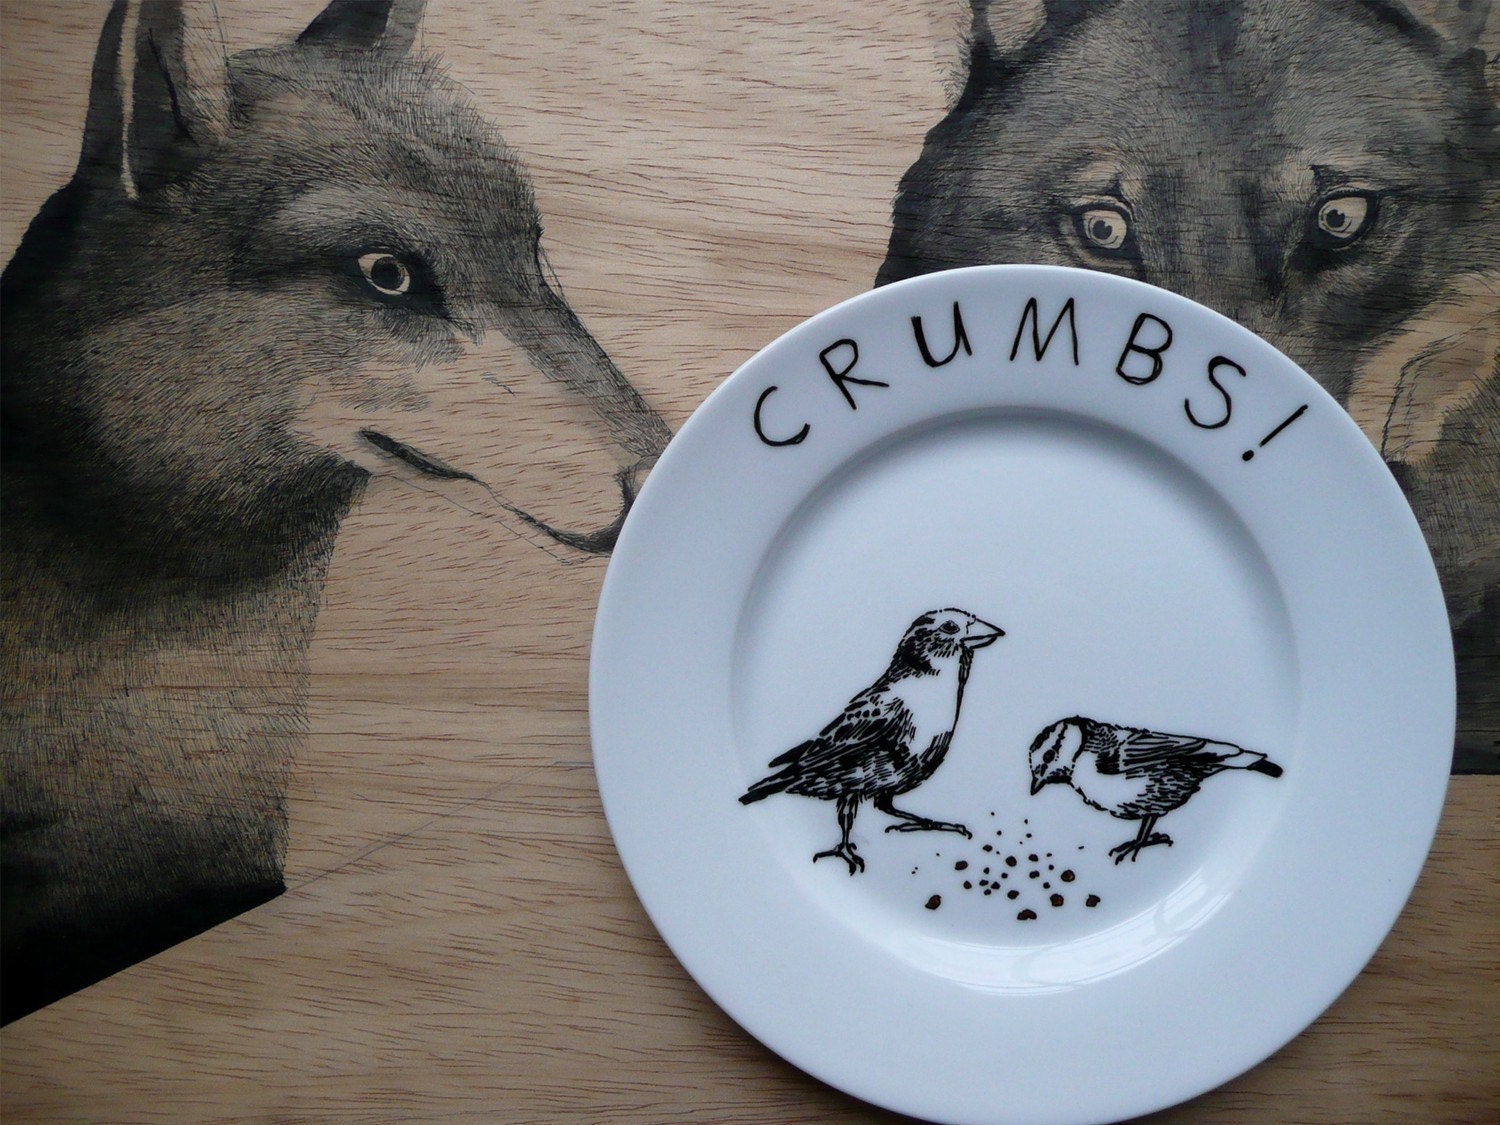 Birds and Crumbs - Hand Painted Porcelain Side Plate